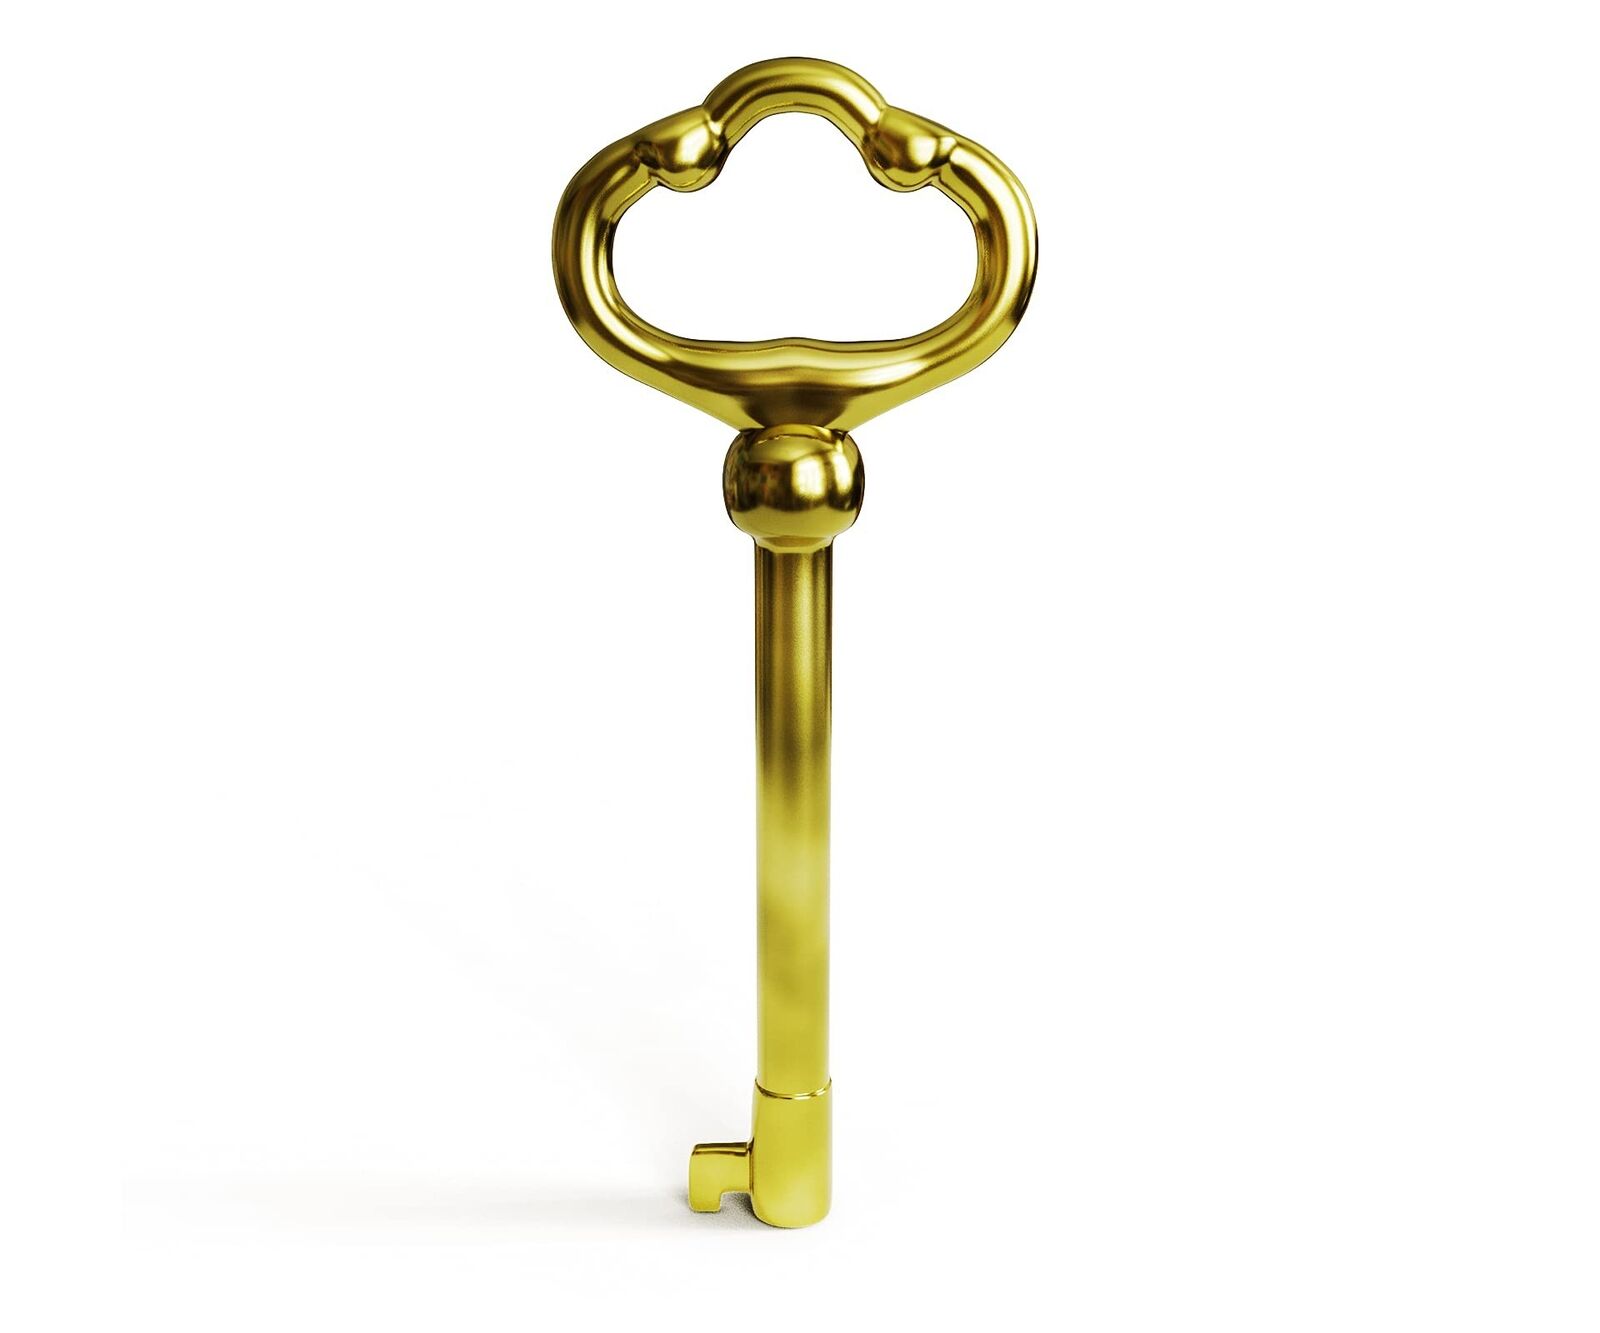 KY-2 Skeleton Key Reproduction Brass Plate Hollow Barrel Key for Cabinets, Dr...